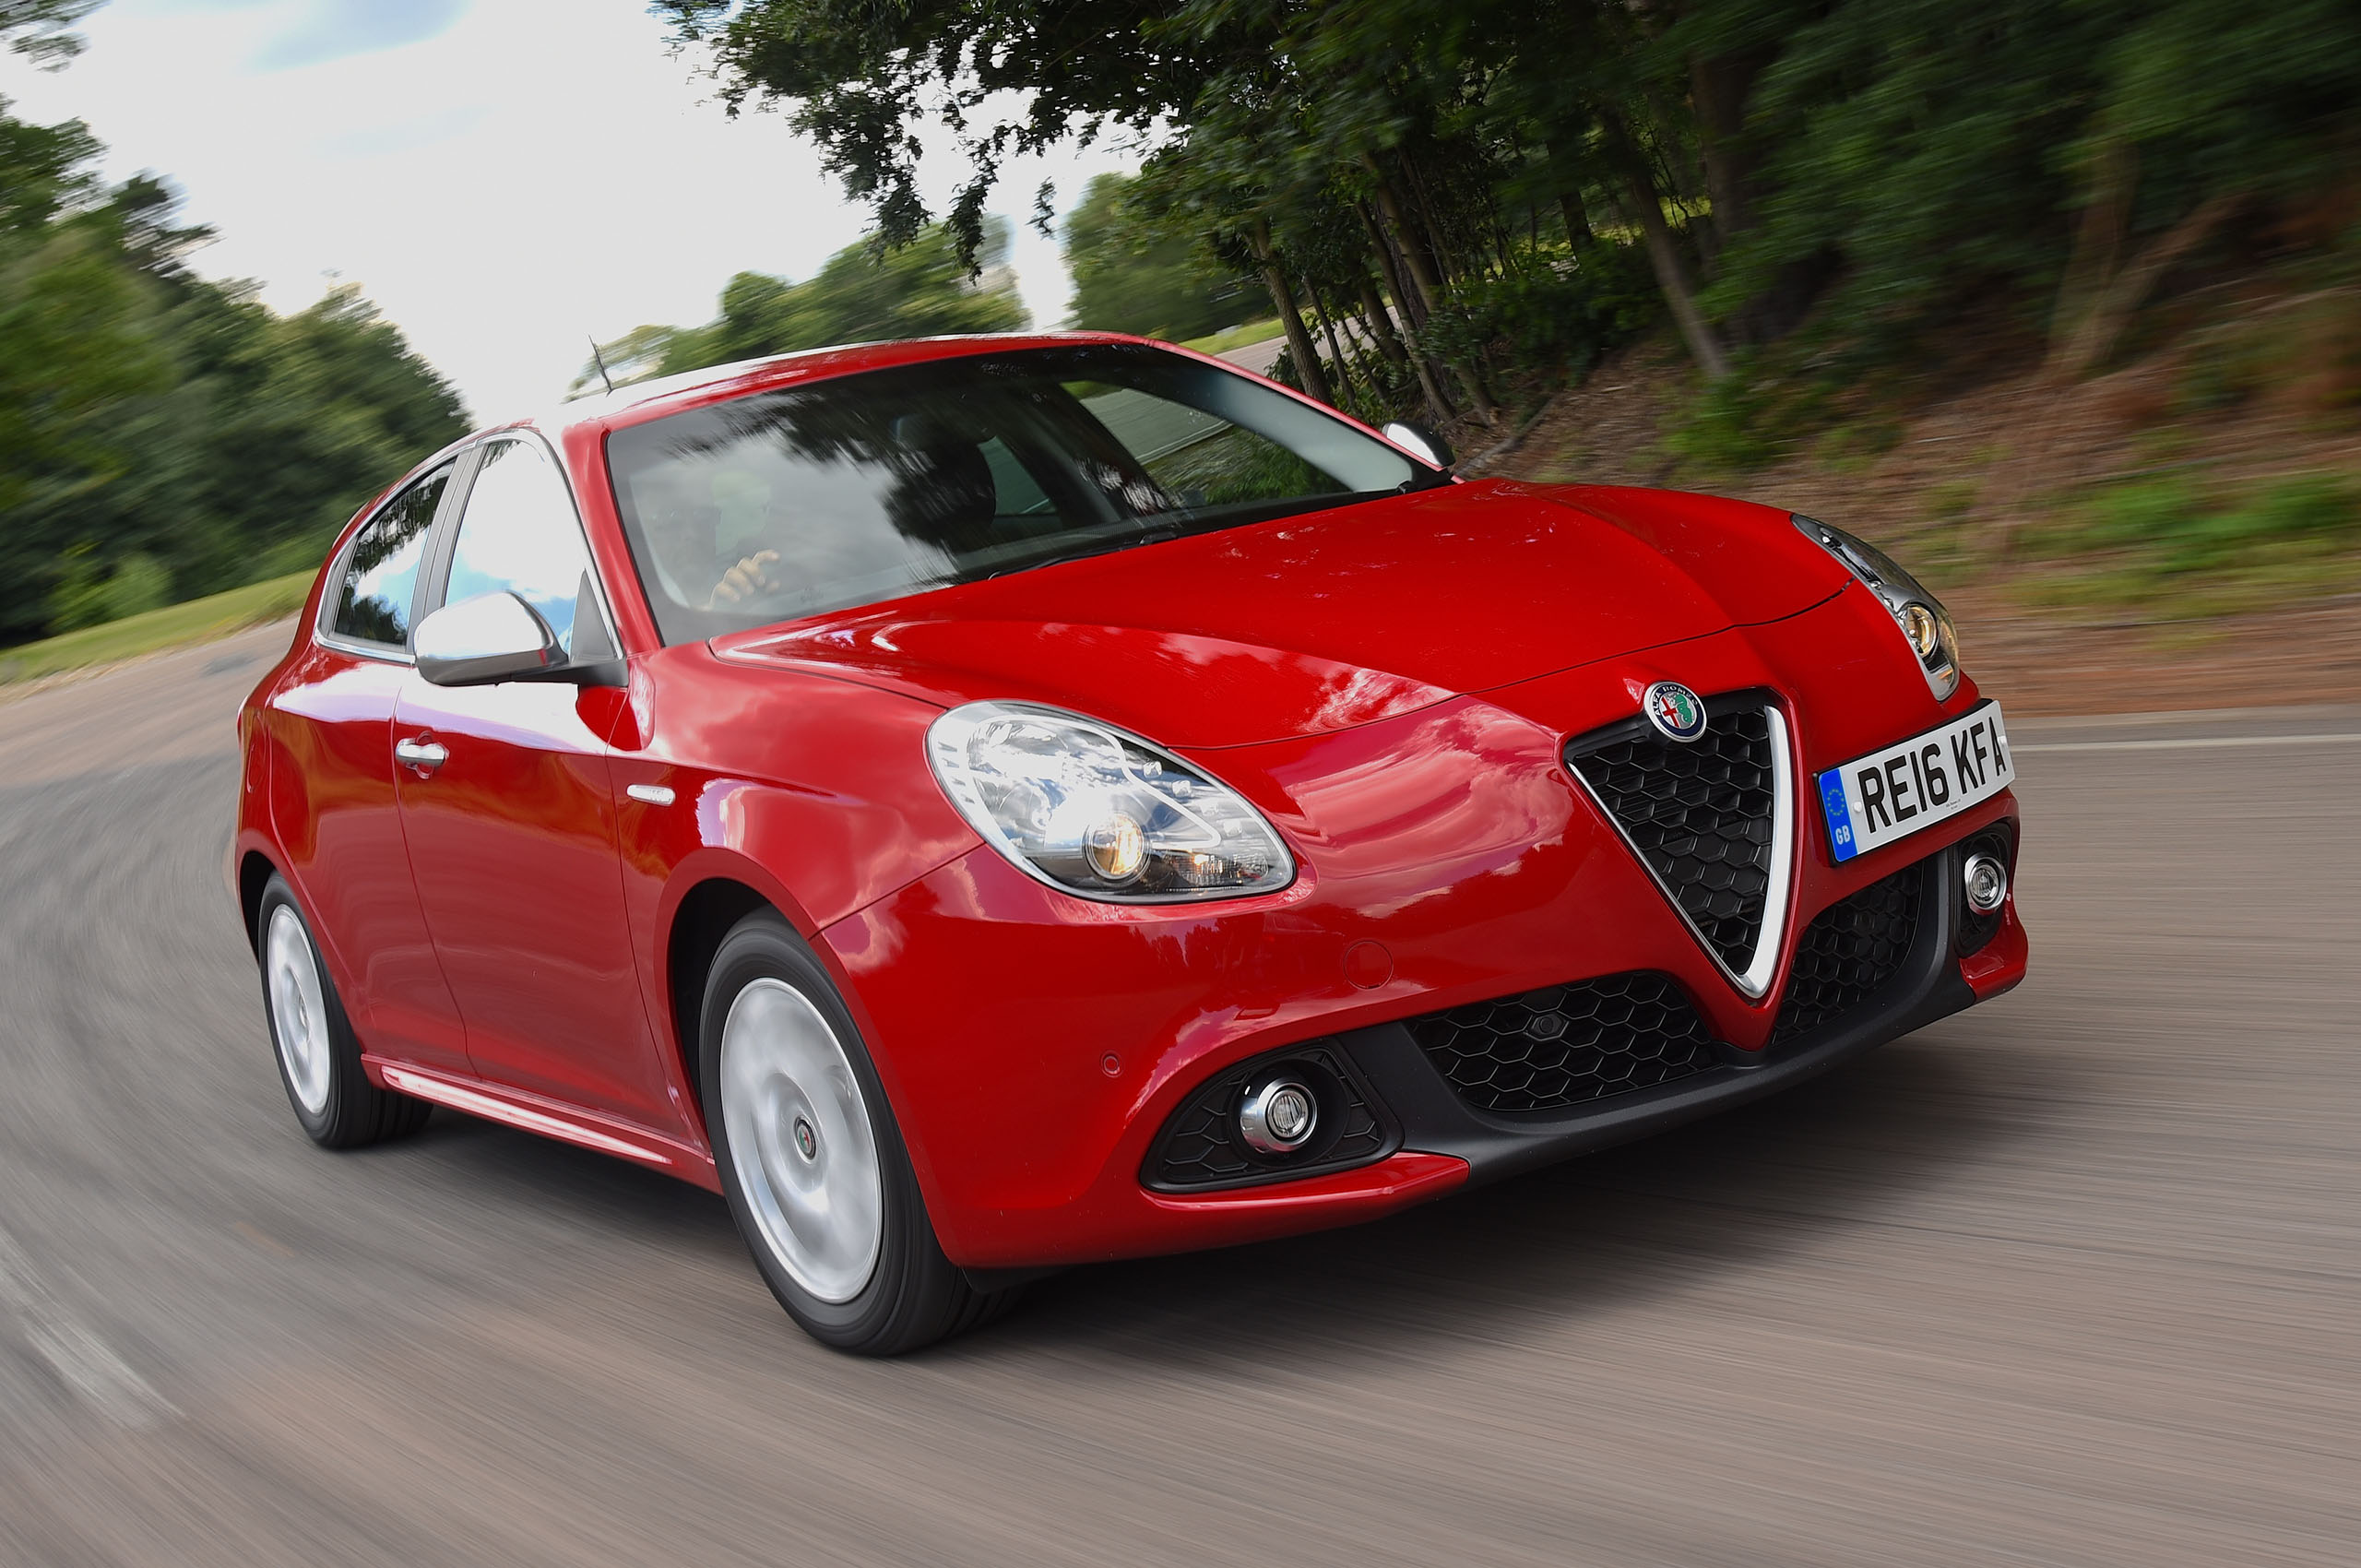 Alfa Romeo Giulietta - Only in Europe, But We Can Still Look